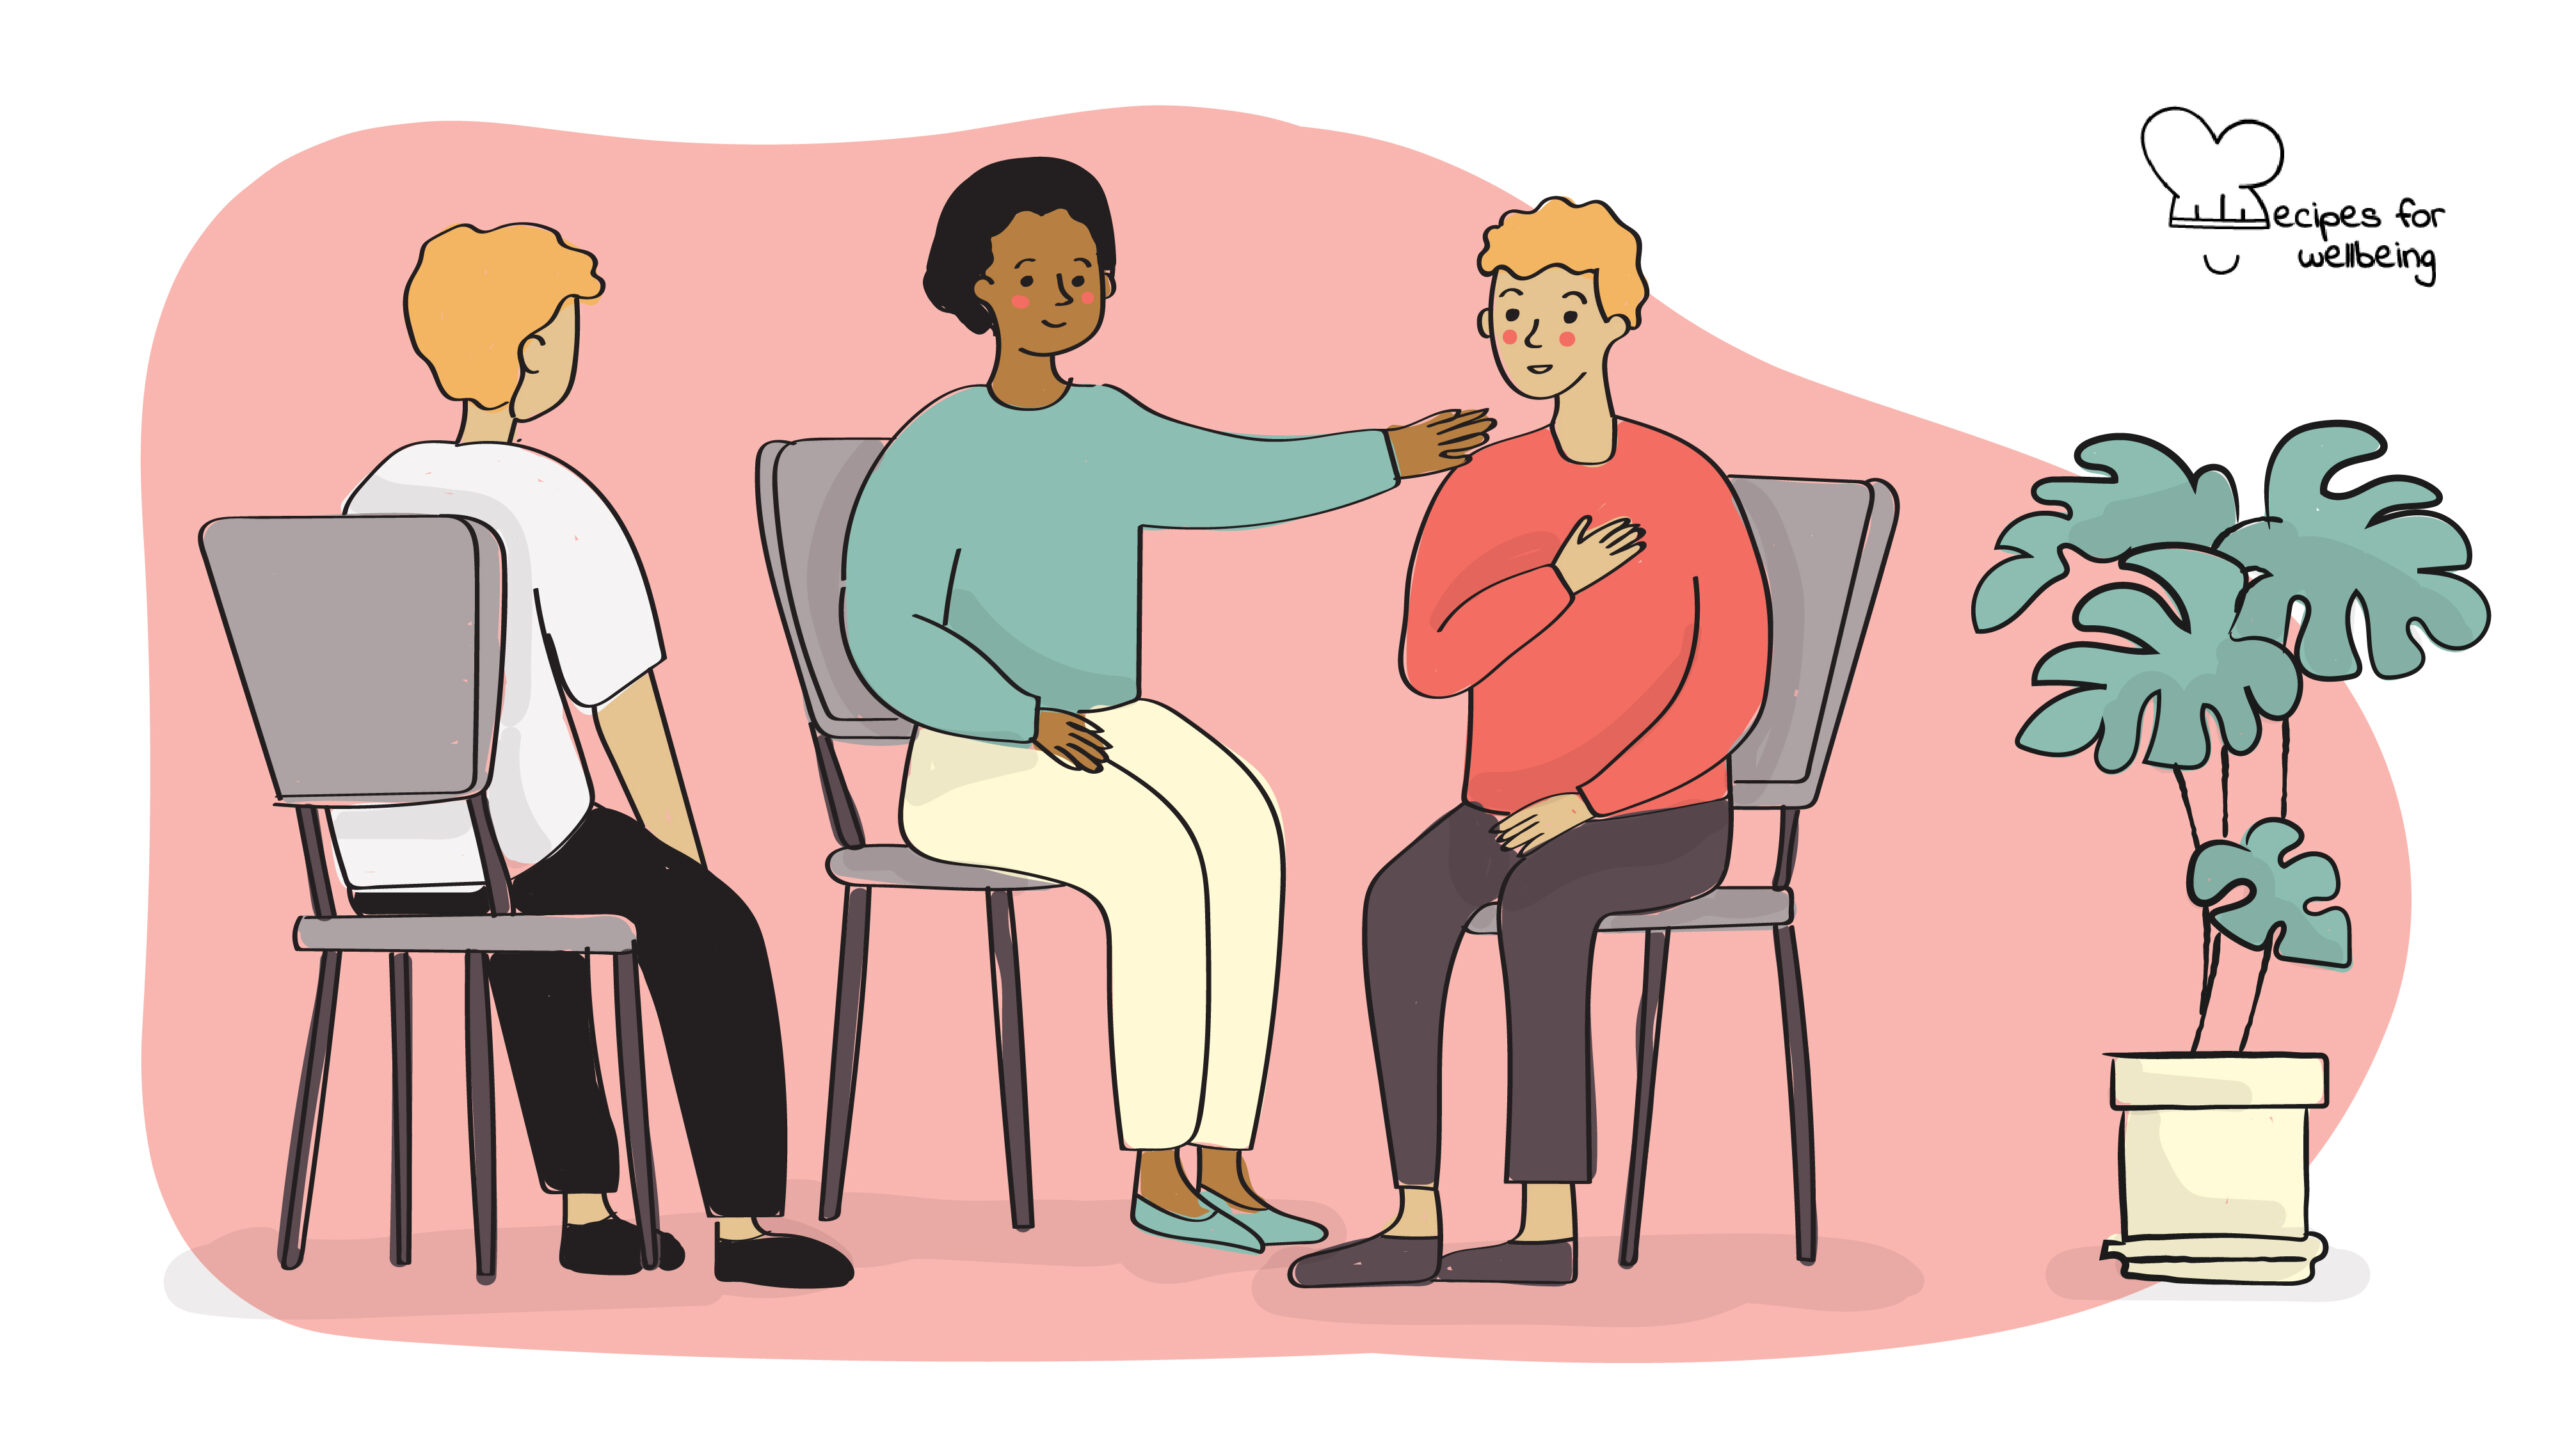 Illustration of three people sitting on chairs (two facing each other and the third in the middle facing the other two). © Recipes for Wellbeing